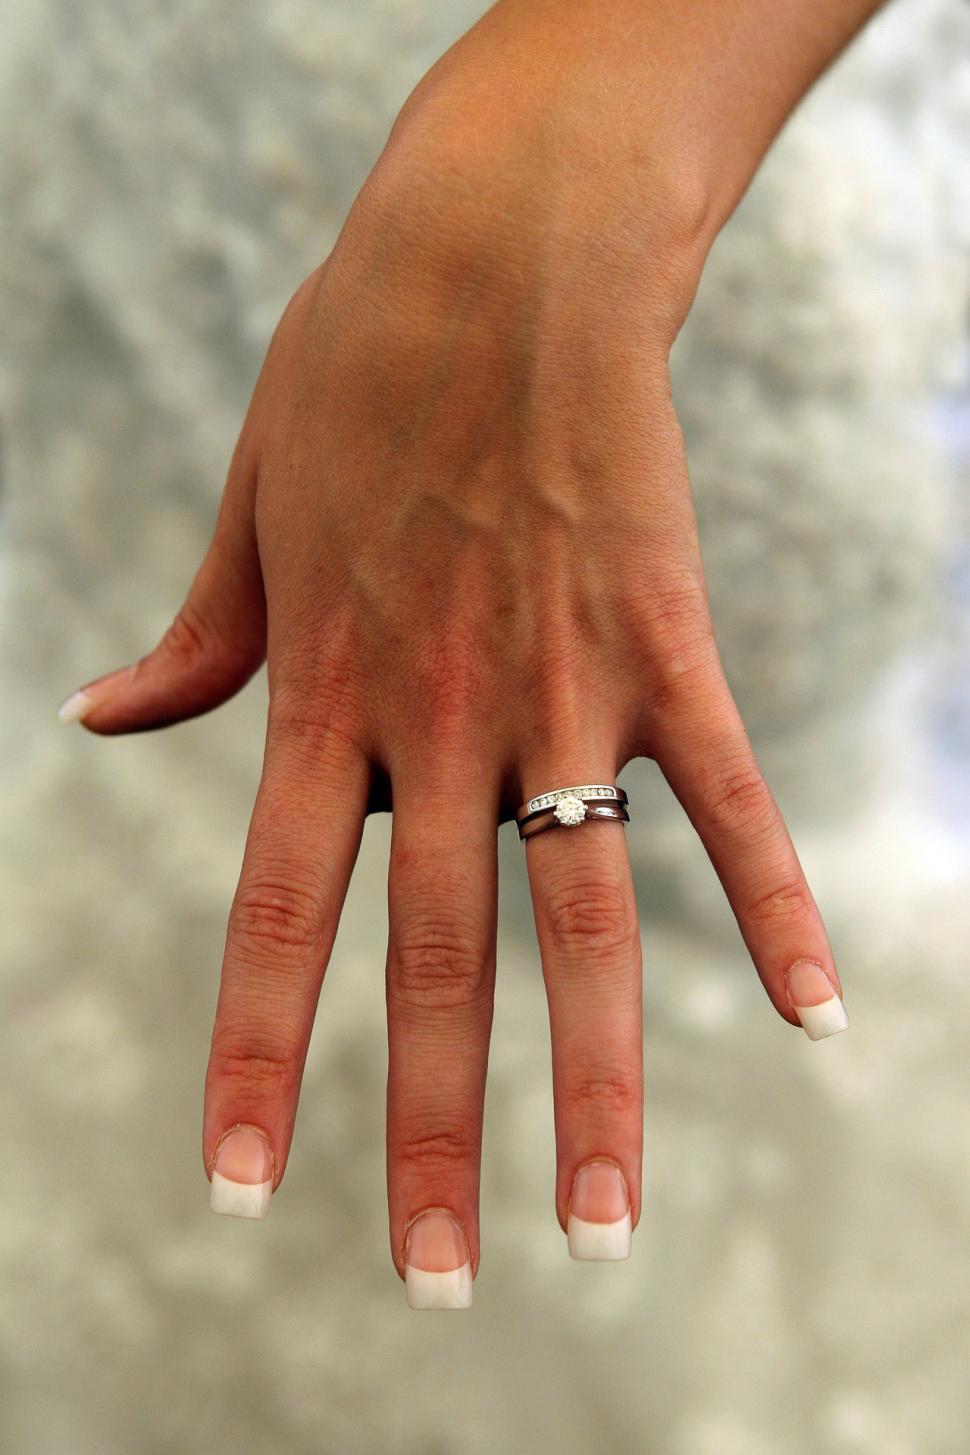 Free Image of Womans Hand Adorned With Ring 